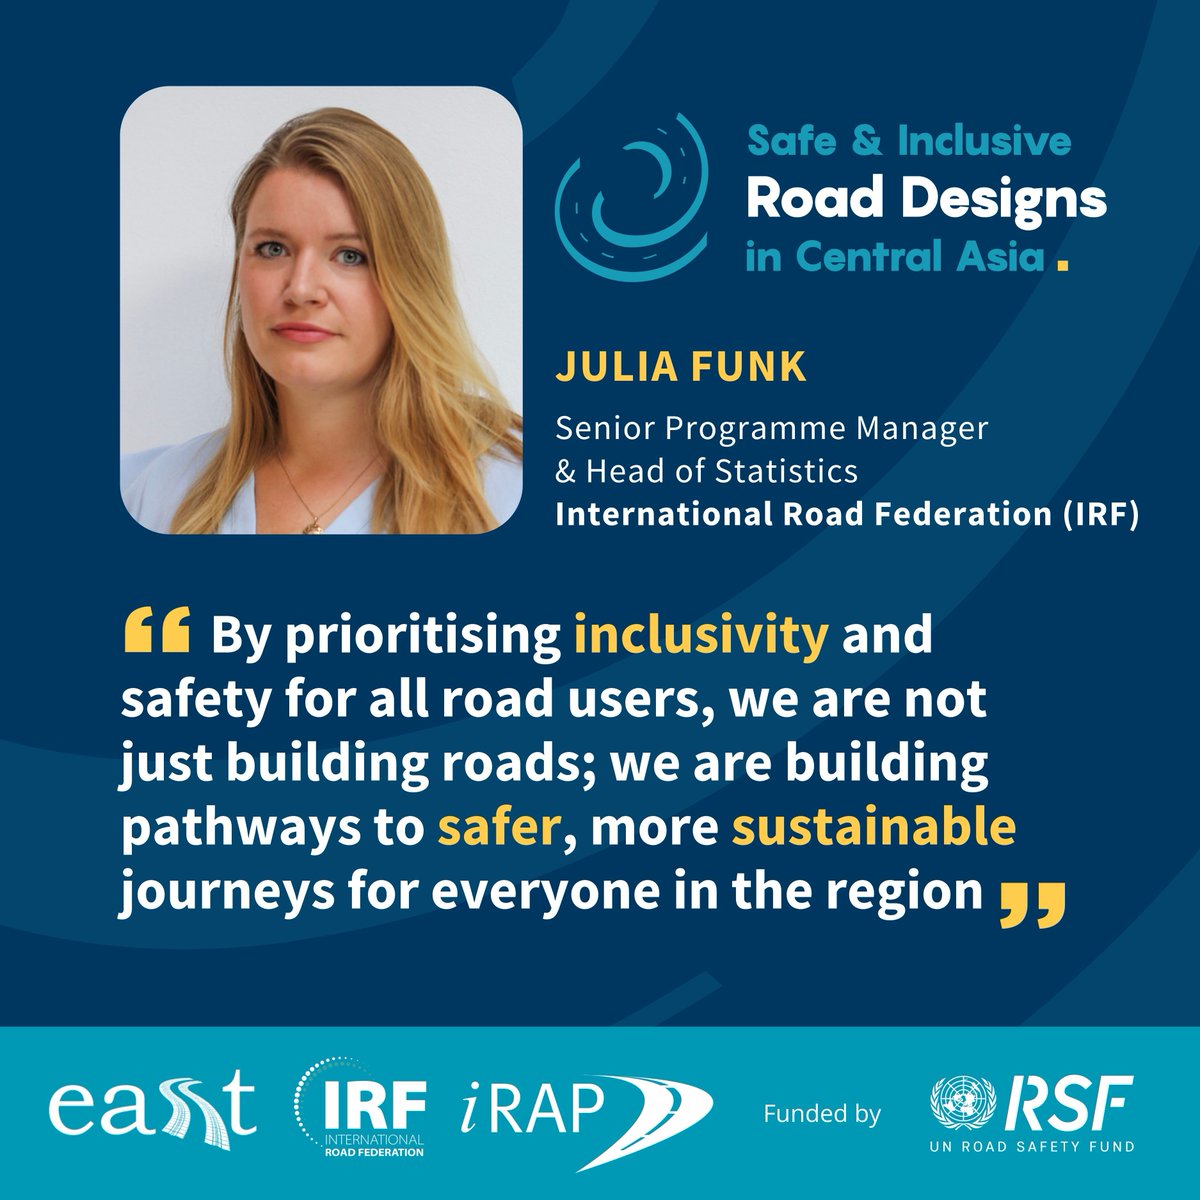 #SafeRoads4CAREC 🚸 The IRF is enhancing road safety in Central Asia together with @EASSTransport, @iRAPSavingLives, and the @UNESCAP, supported by the @UN_RSF. 👉 Read more: buff.ly/3IrYOkM